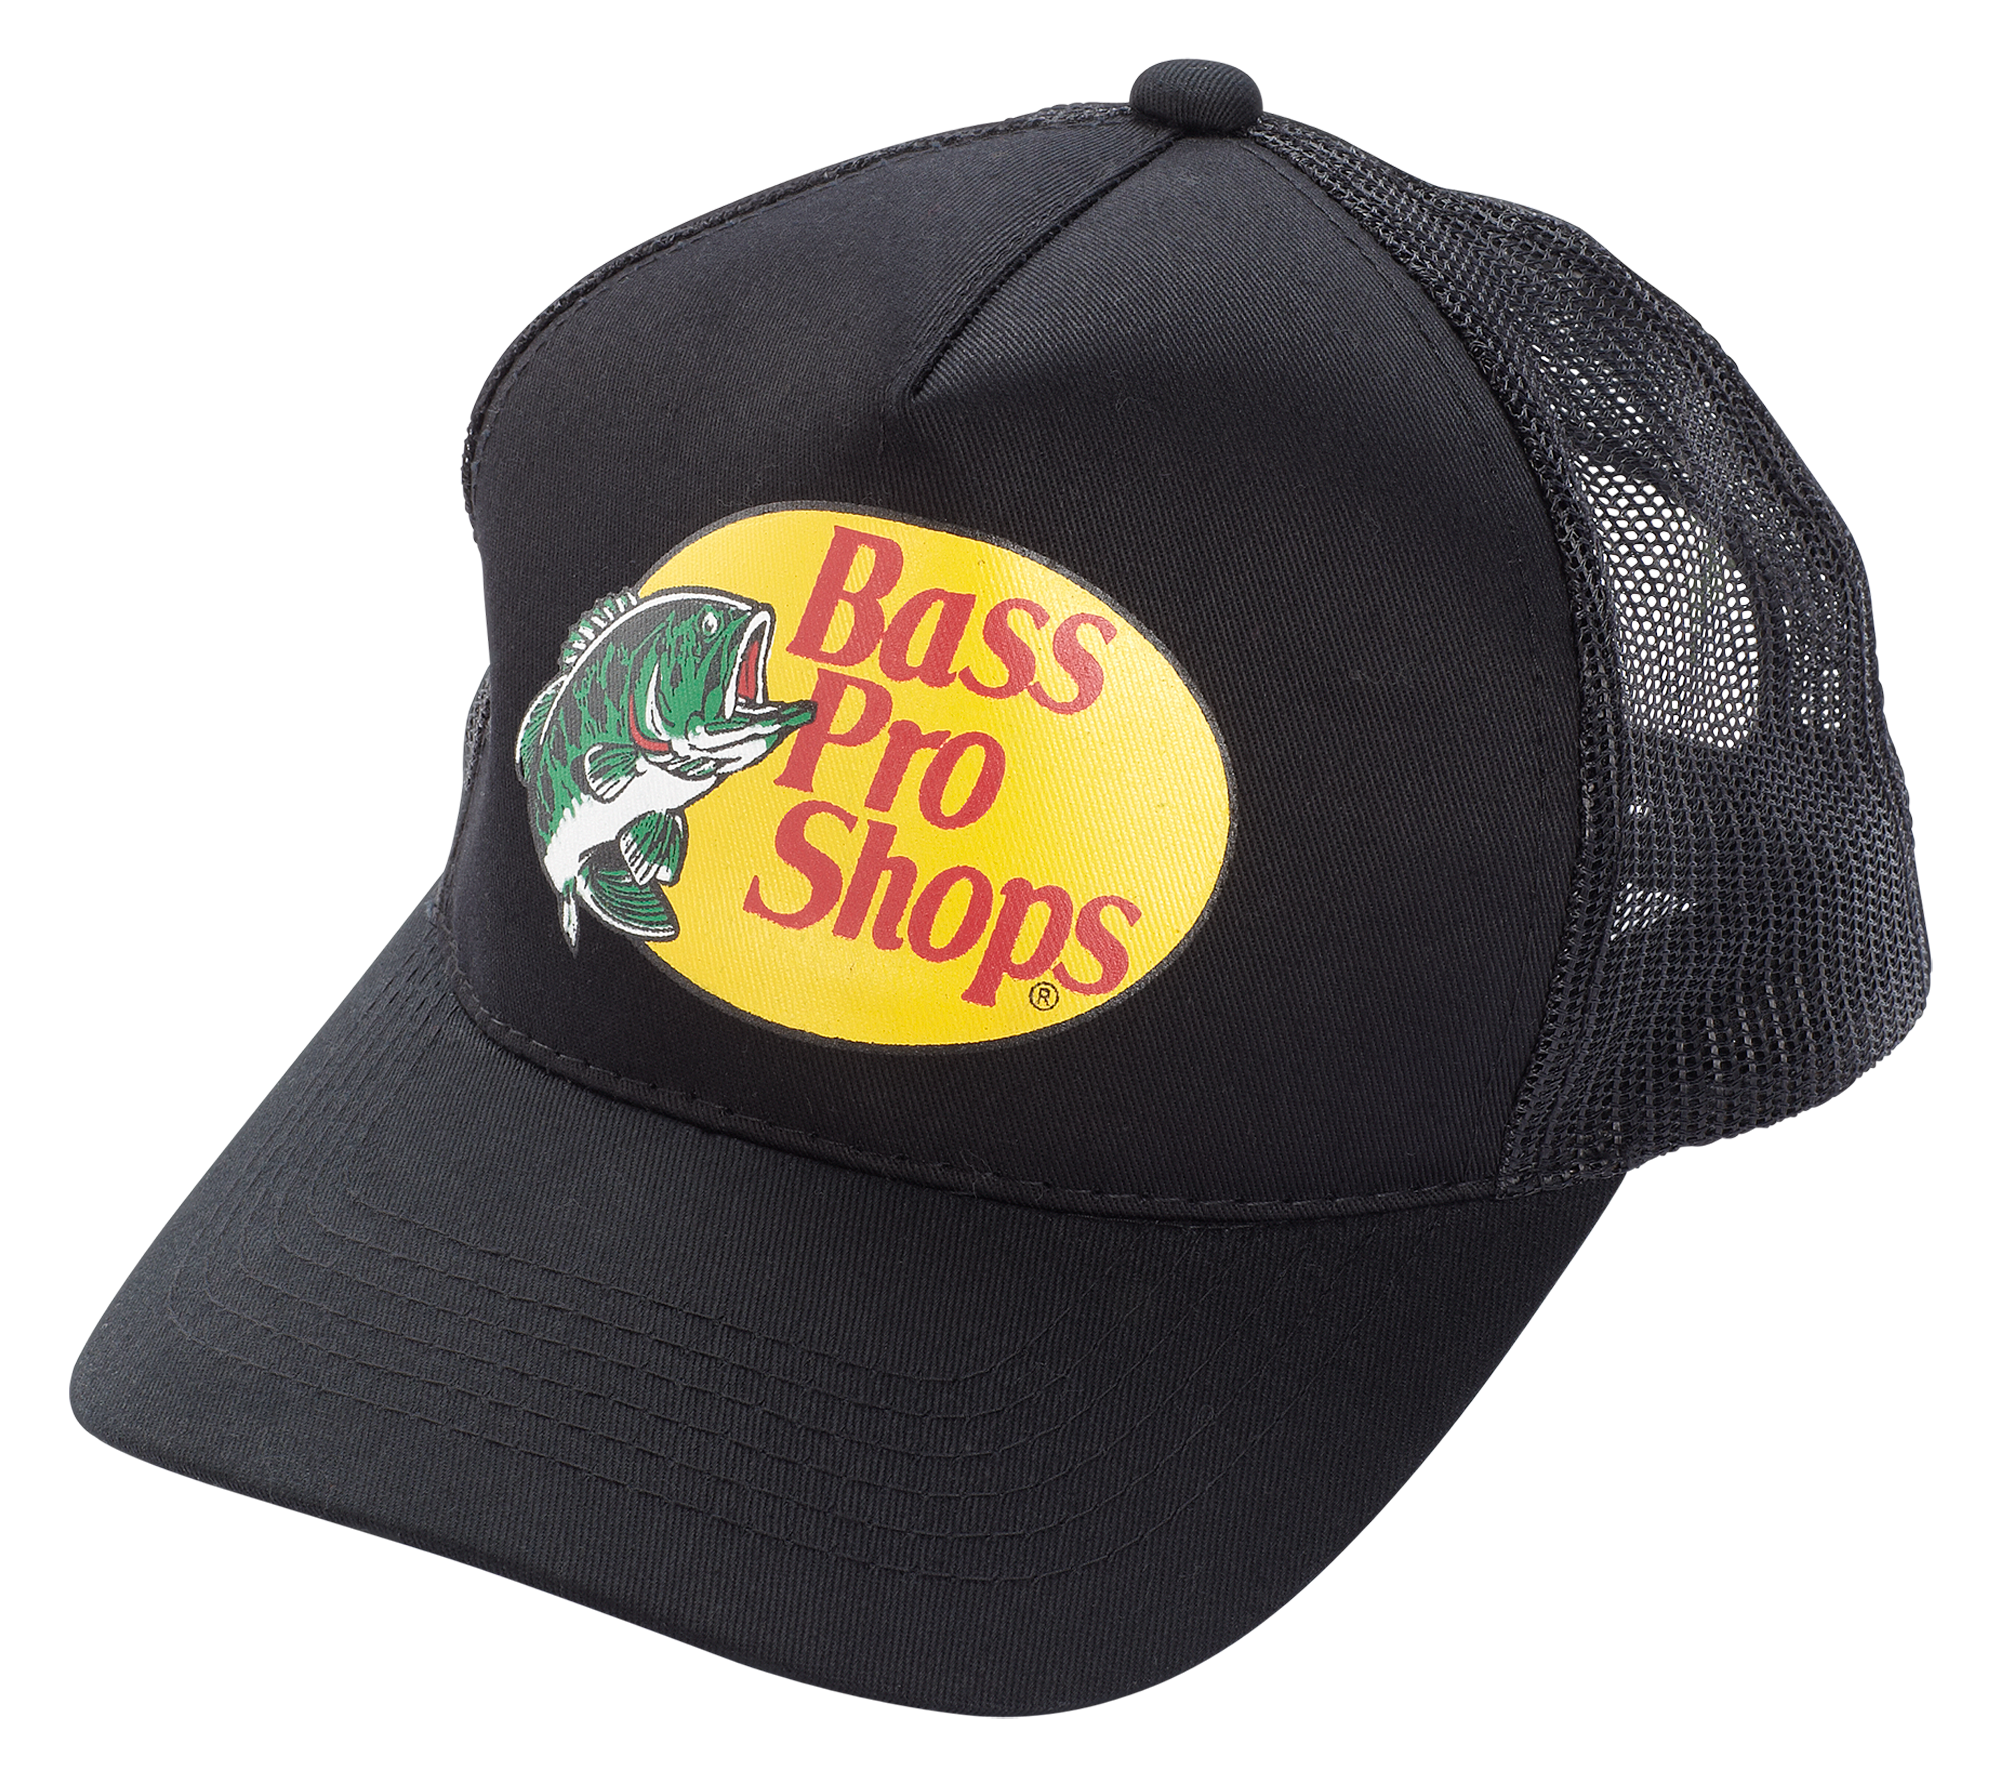 Bass Pro Shops Products